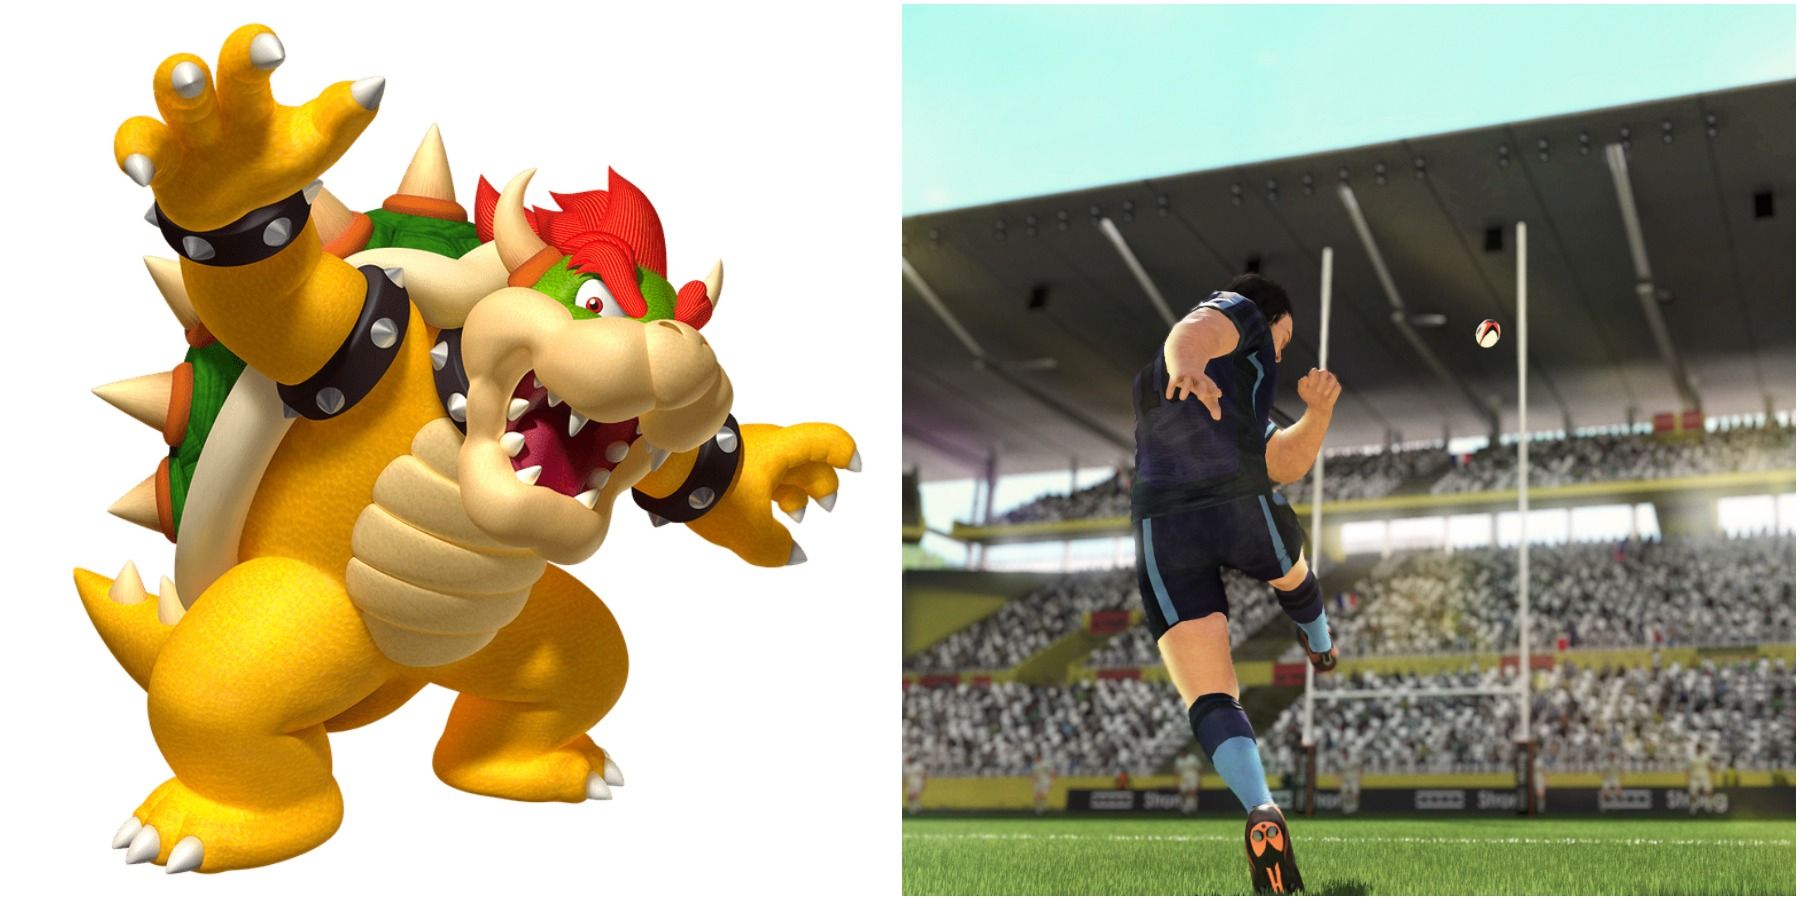 (Left) Bowser (Right) Player kicking the ball in Rugby